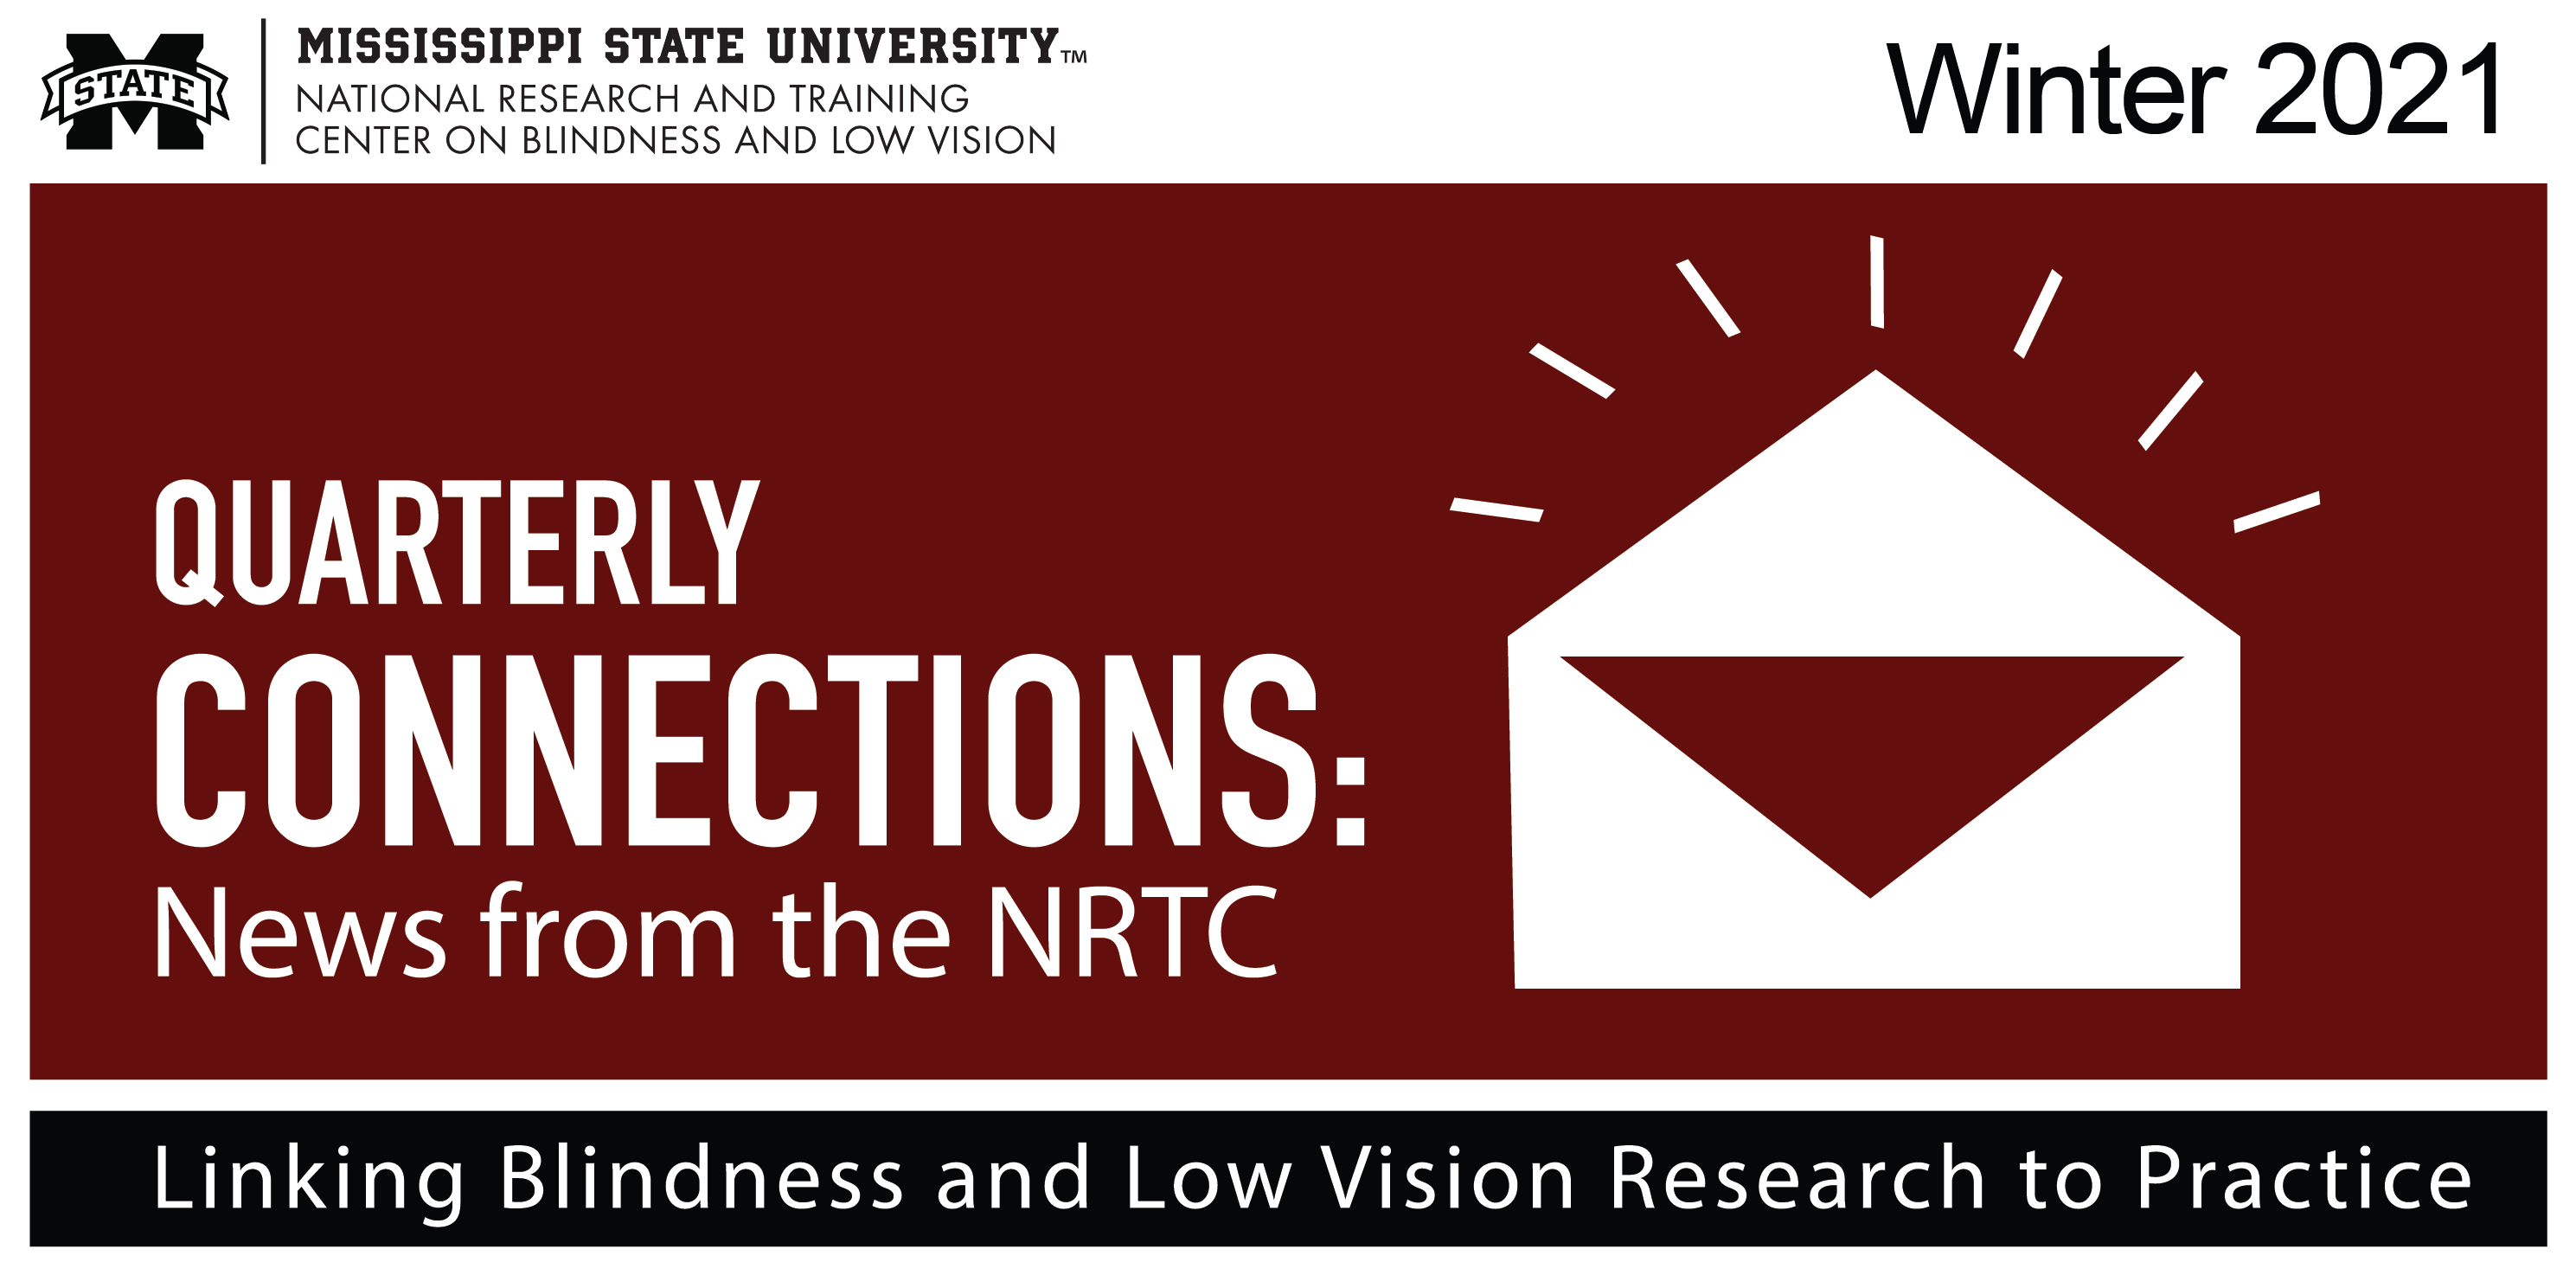 MSU NRTC logo, text “Quarterly Connections: News from the NRTC” on maroon background with open envelope graphic; text “Winter 2021,” and “Linking Blindness and Low Vision Research to Practice” 